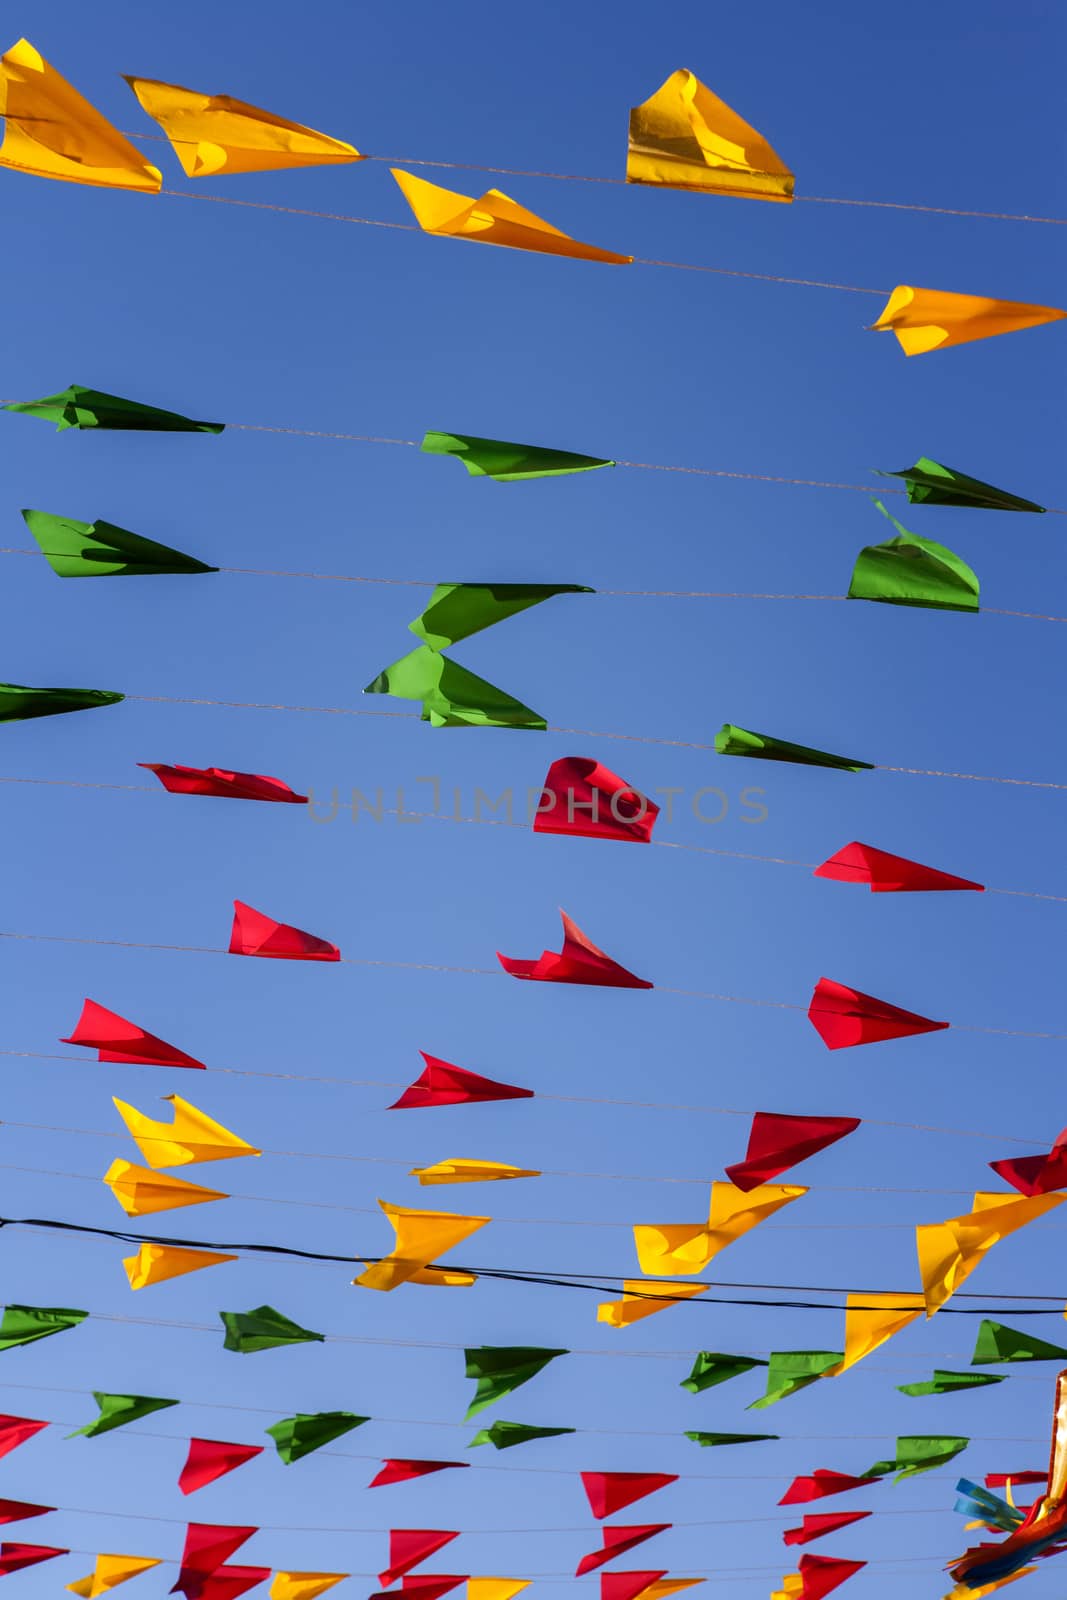 Bunting, colorful party flags, on a blue sky. by BrazilPhoto